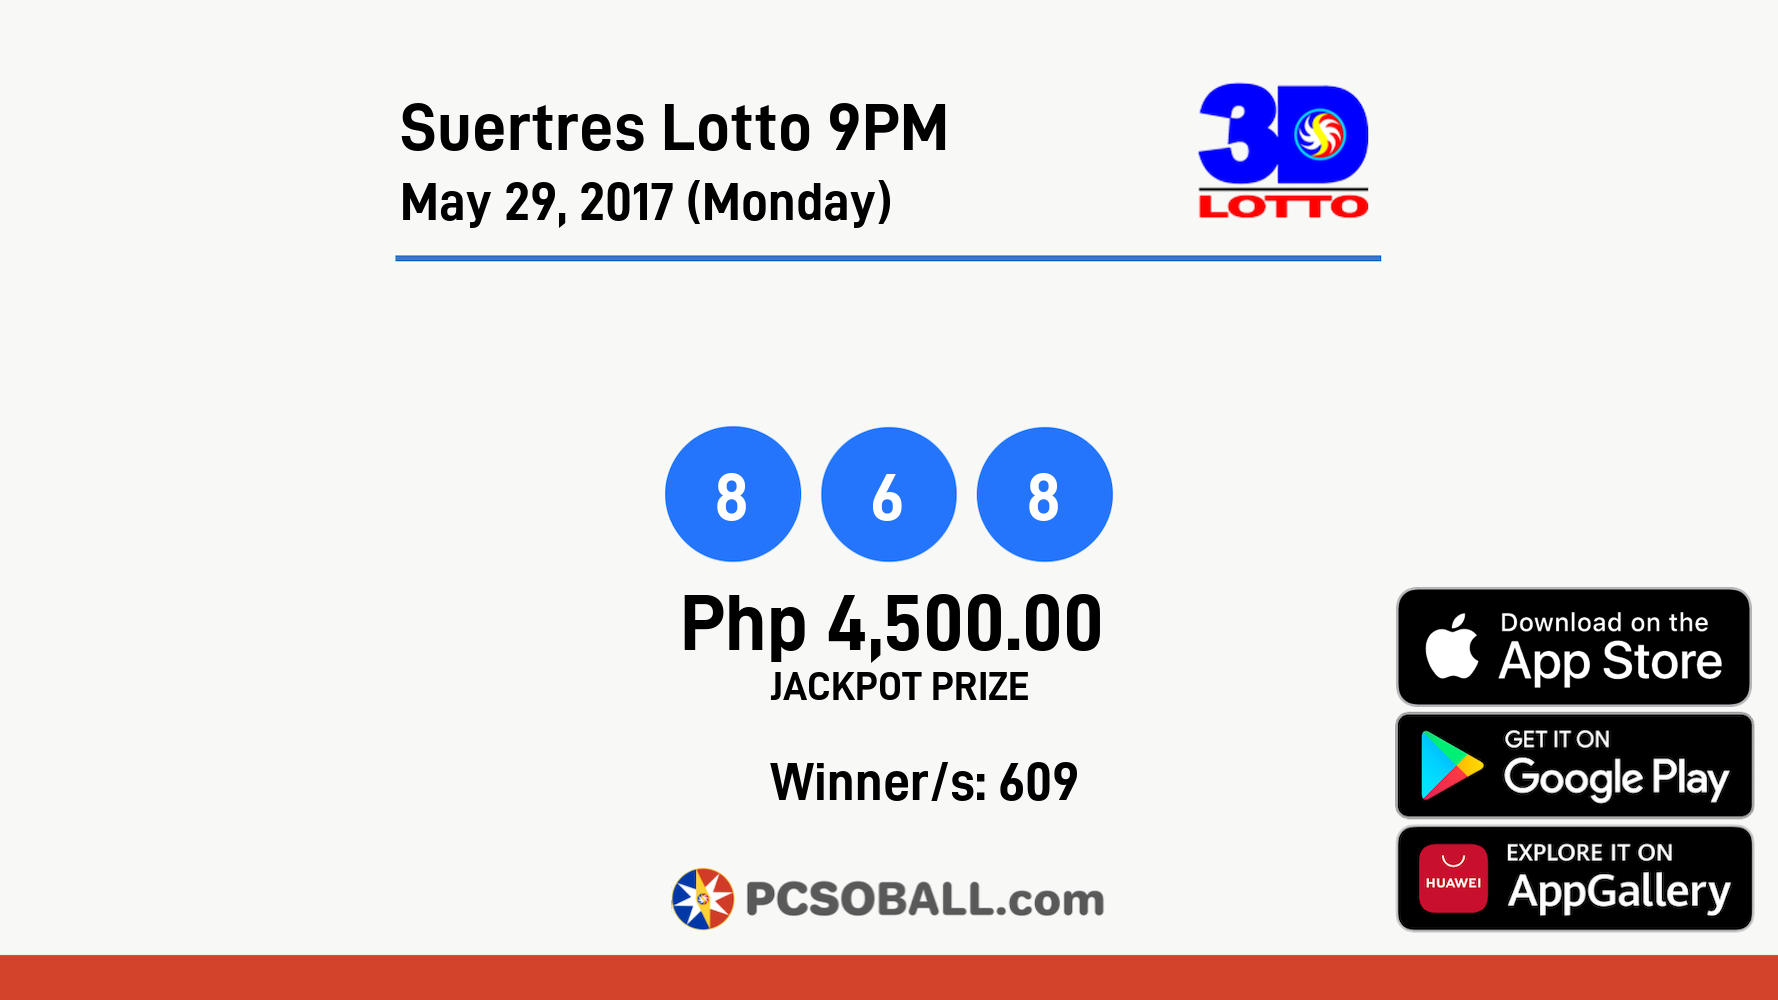 Suertres Lotto 9PM May 29, 2017 (Monday) Result